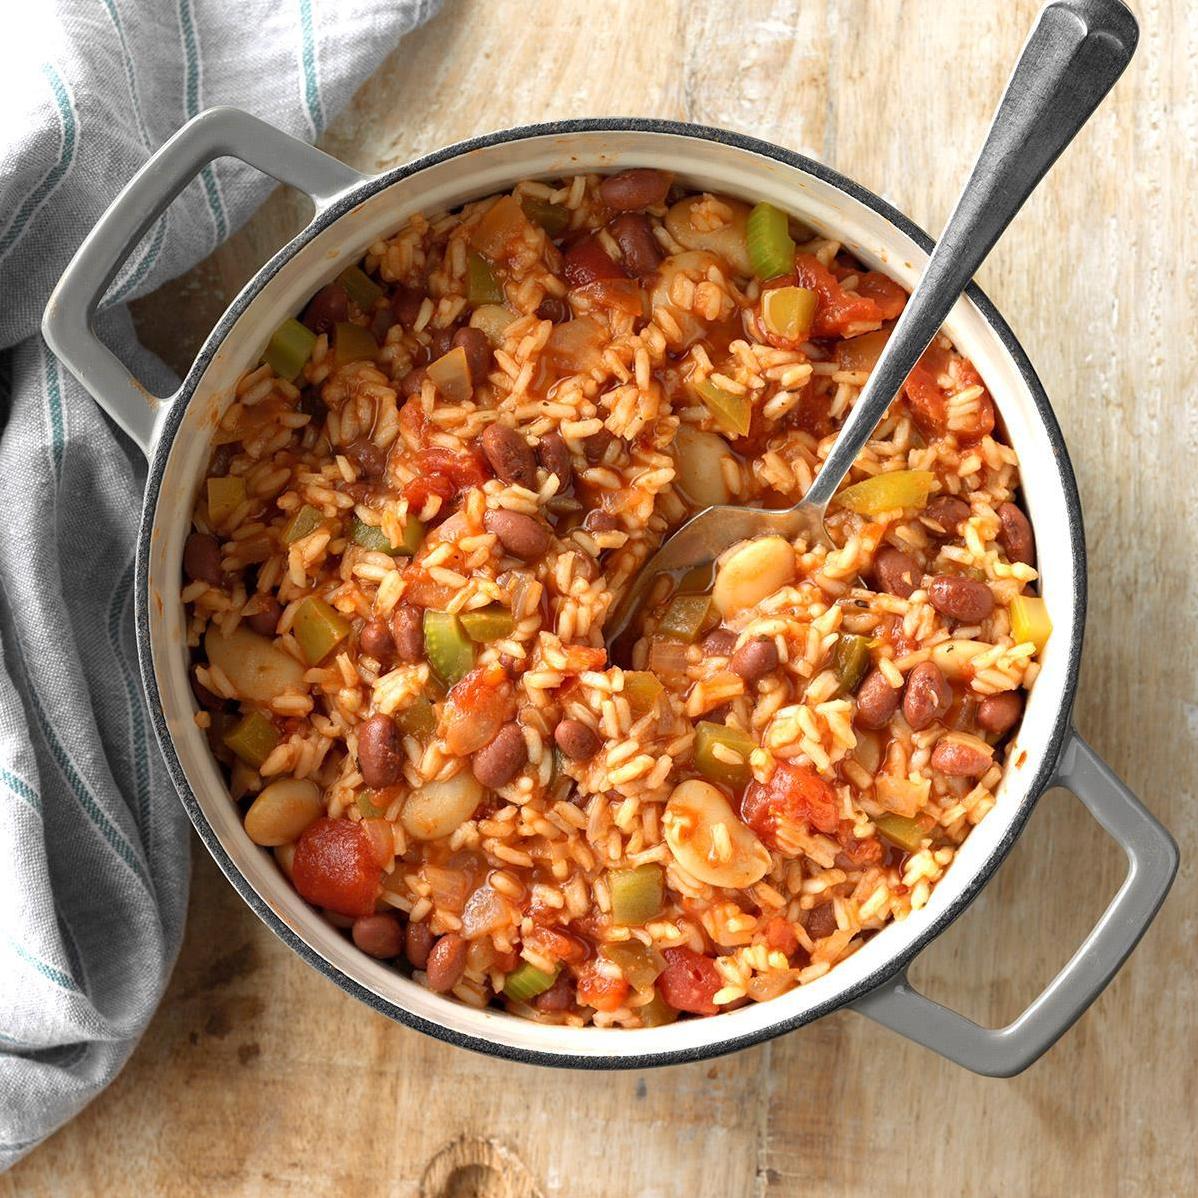  Make your taste buds sing with this vibrant and flavorful vegetarian jambalaya.